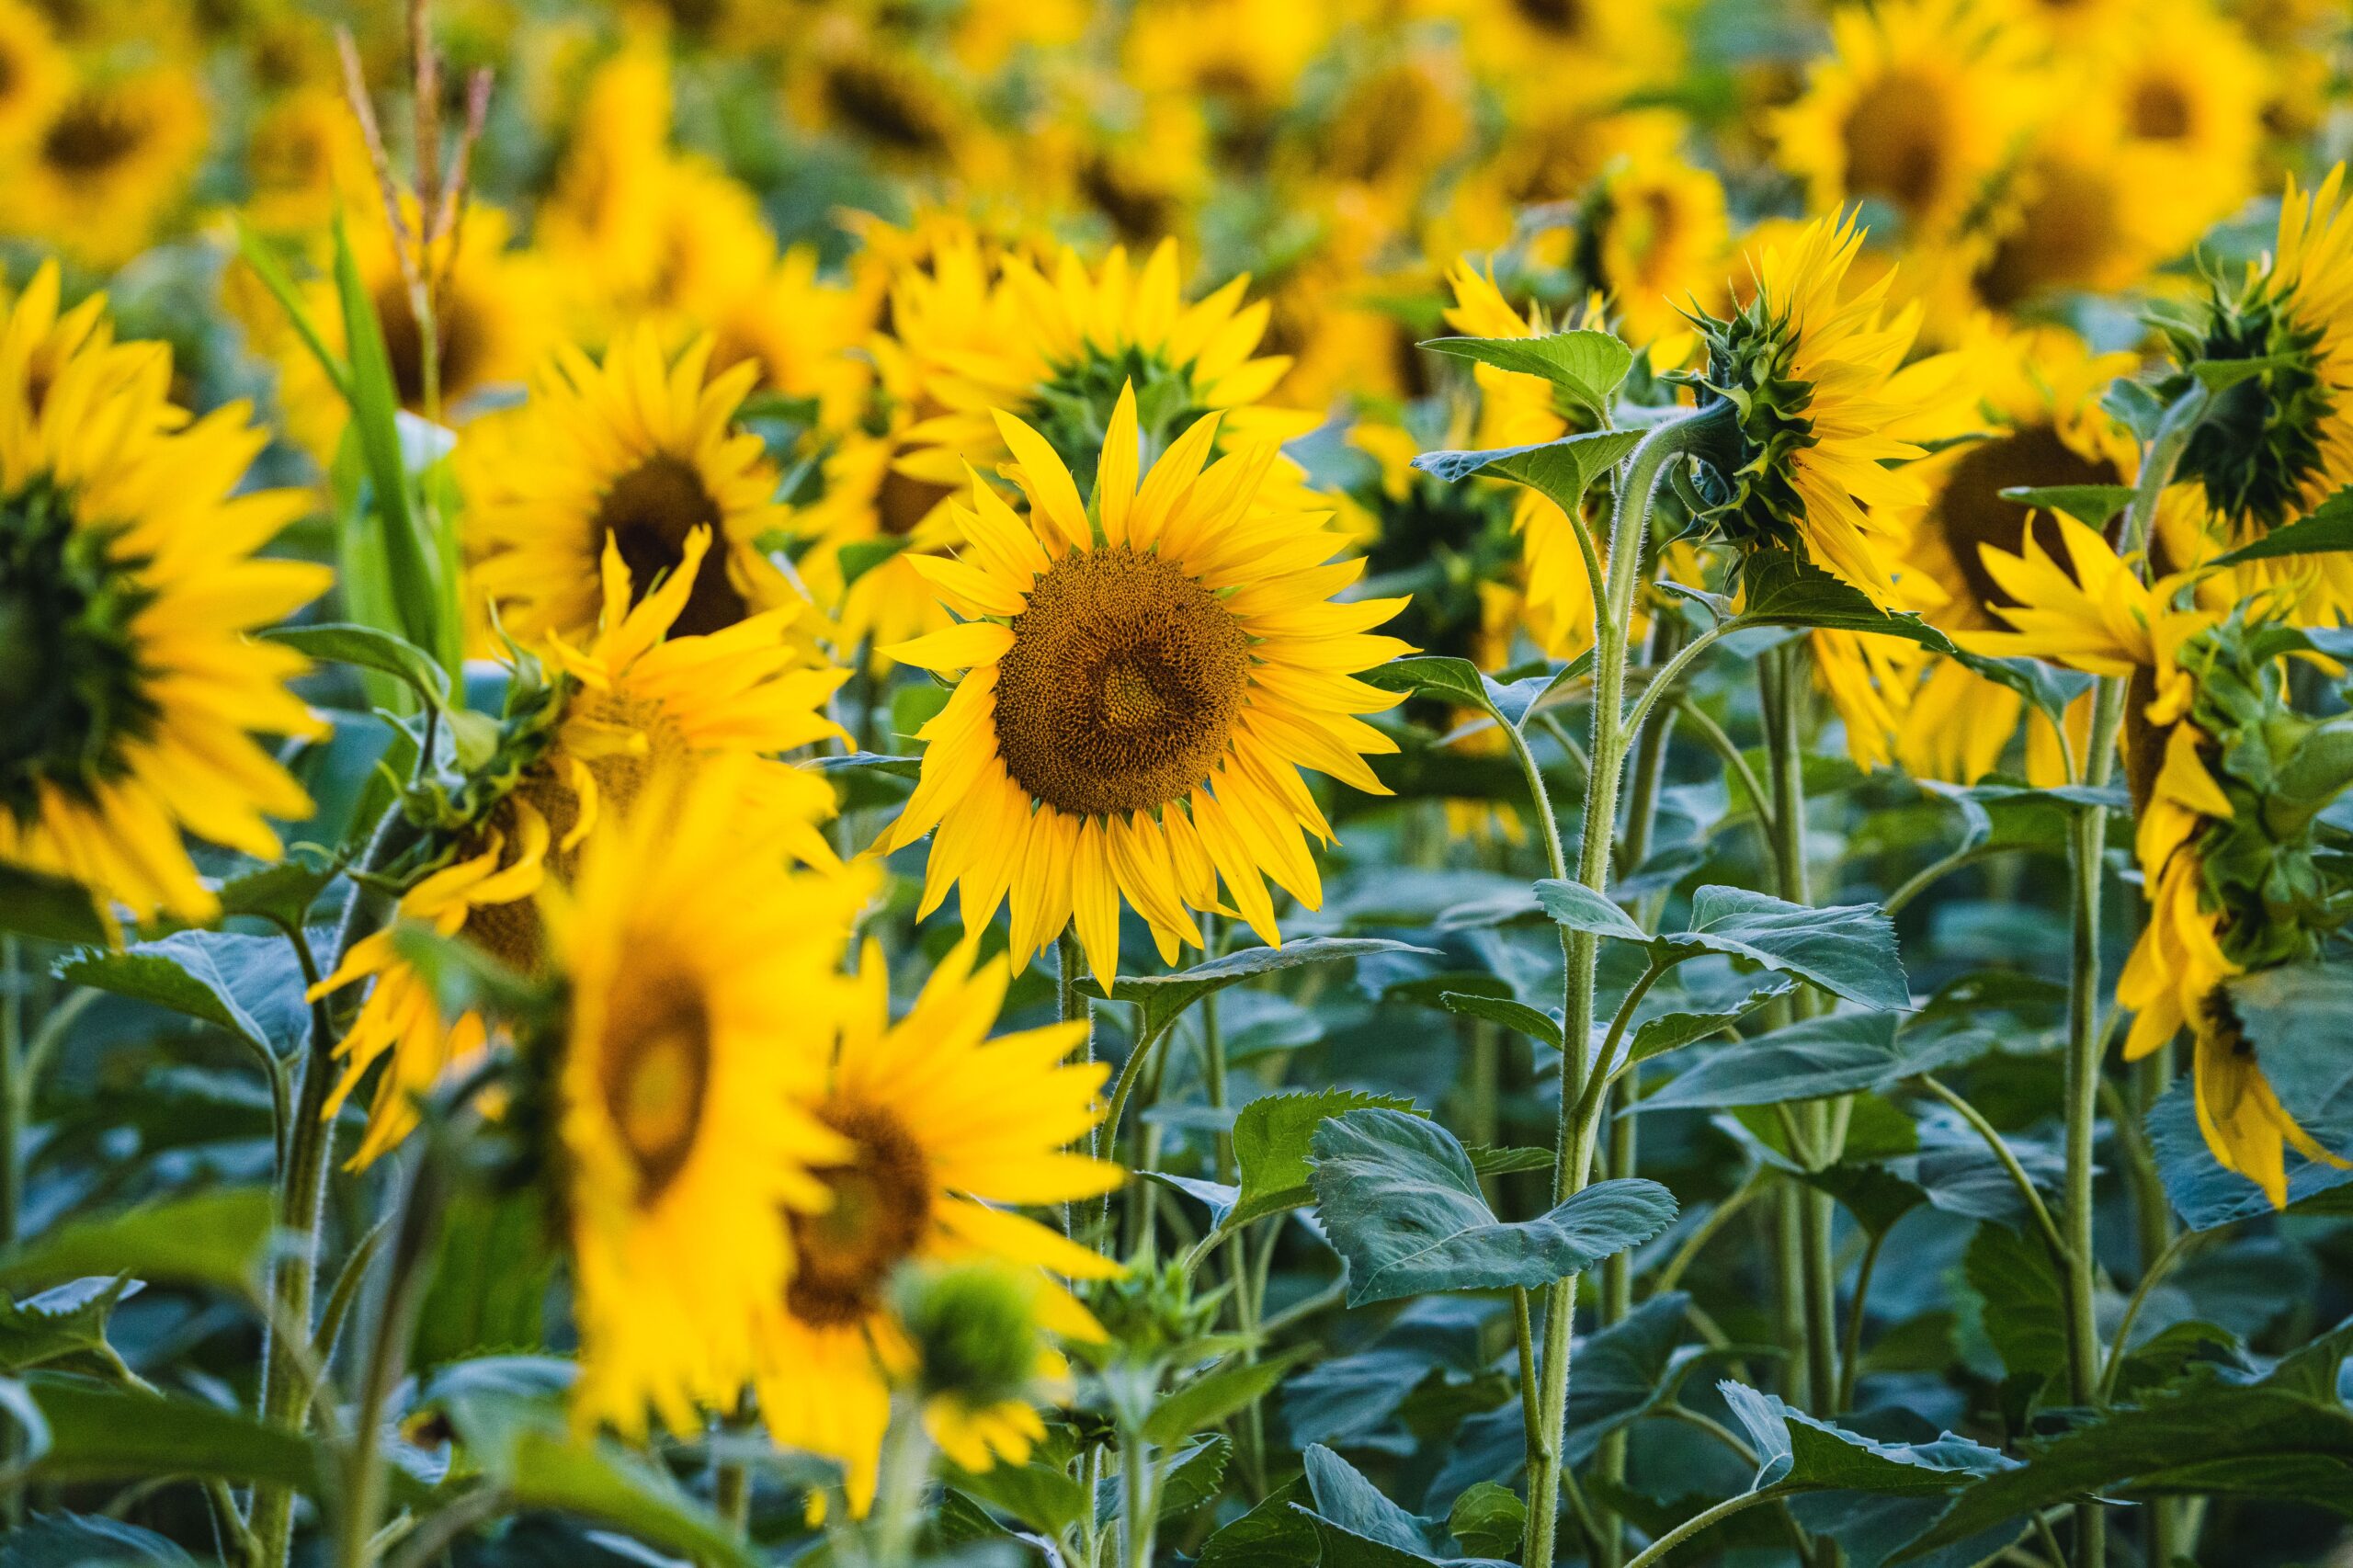 How To Grow Sunflowers in 3 Easy Steps